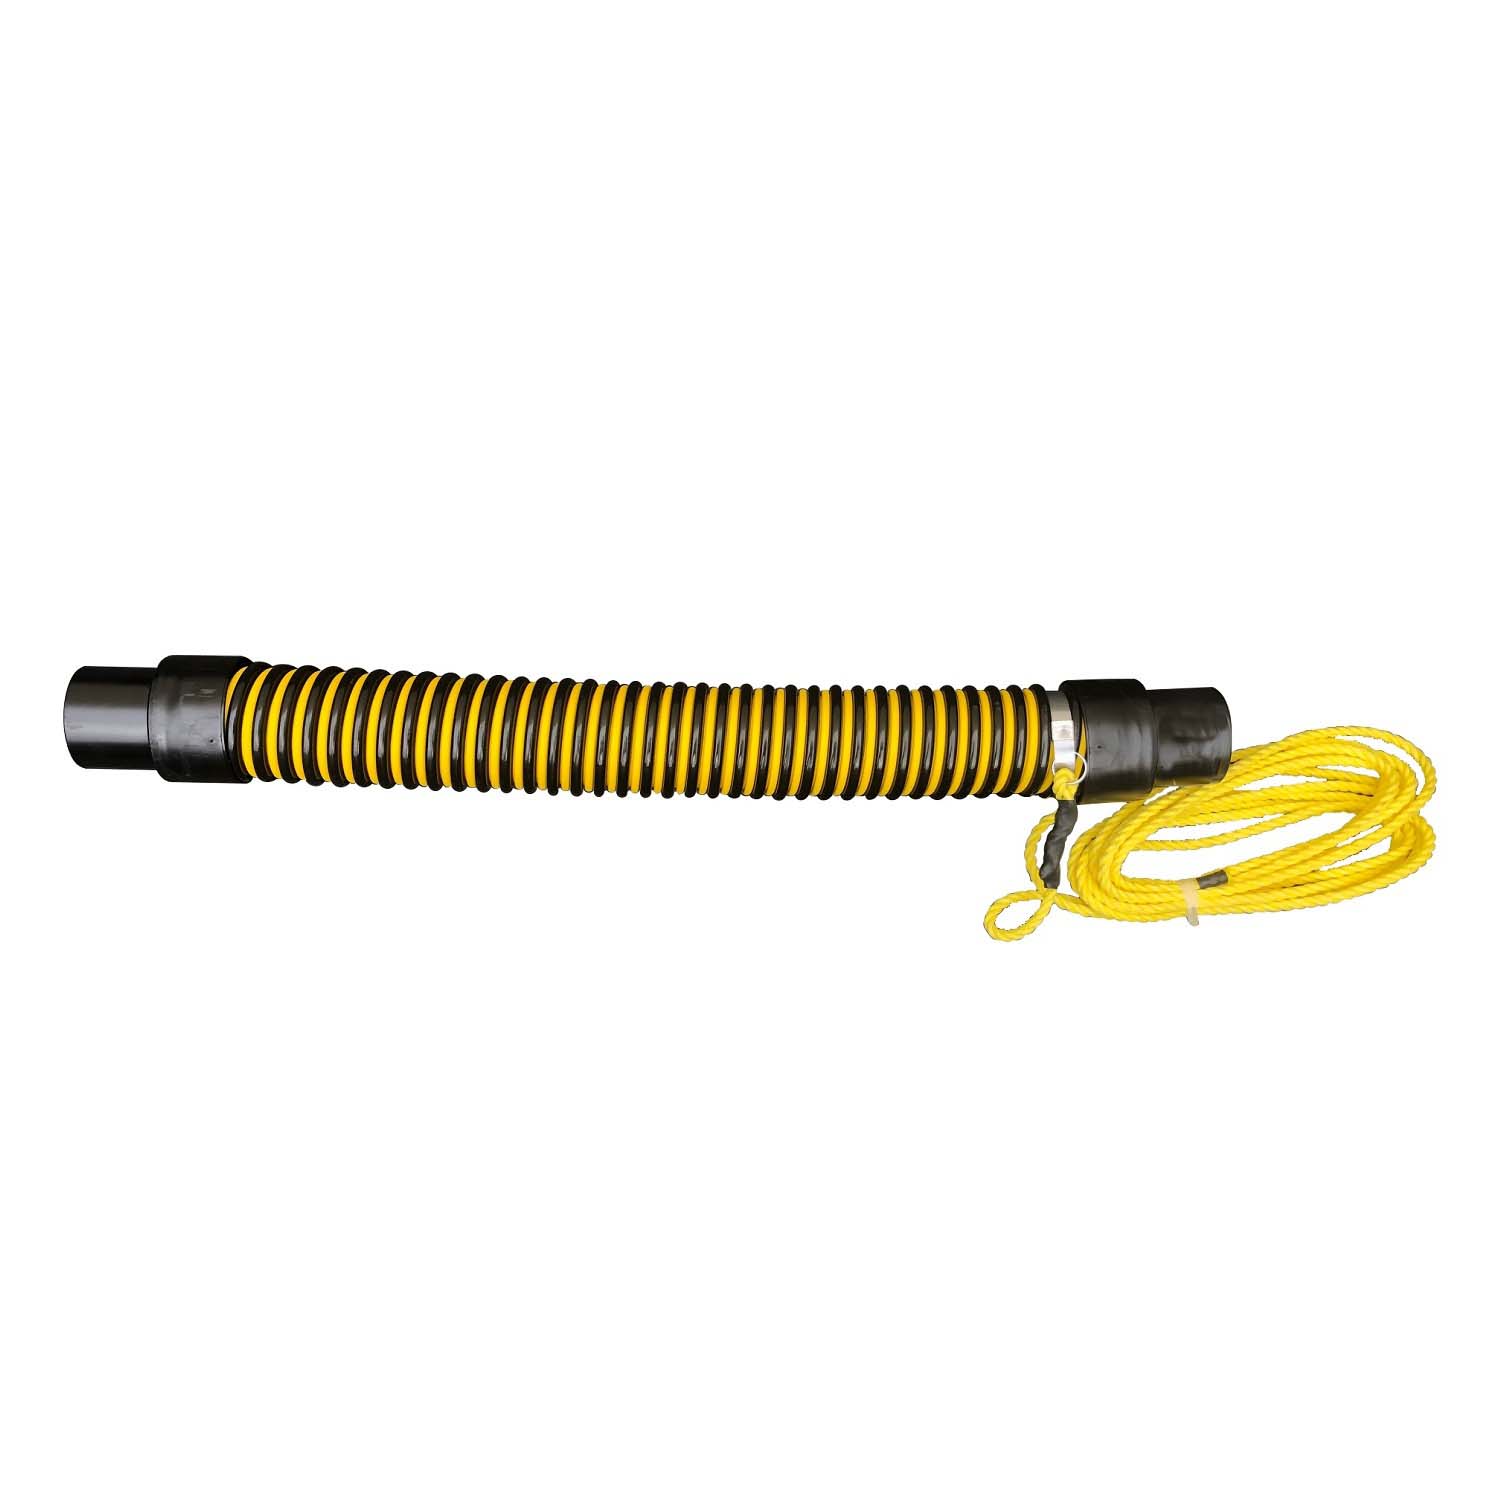 Tiger Tail Hose Guide with Rope